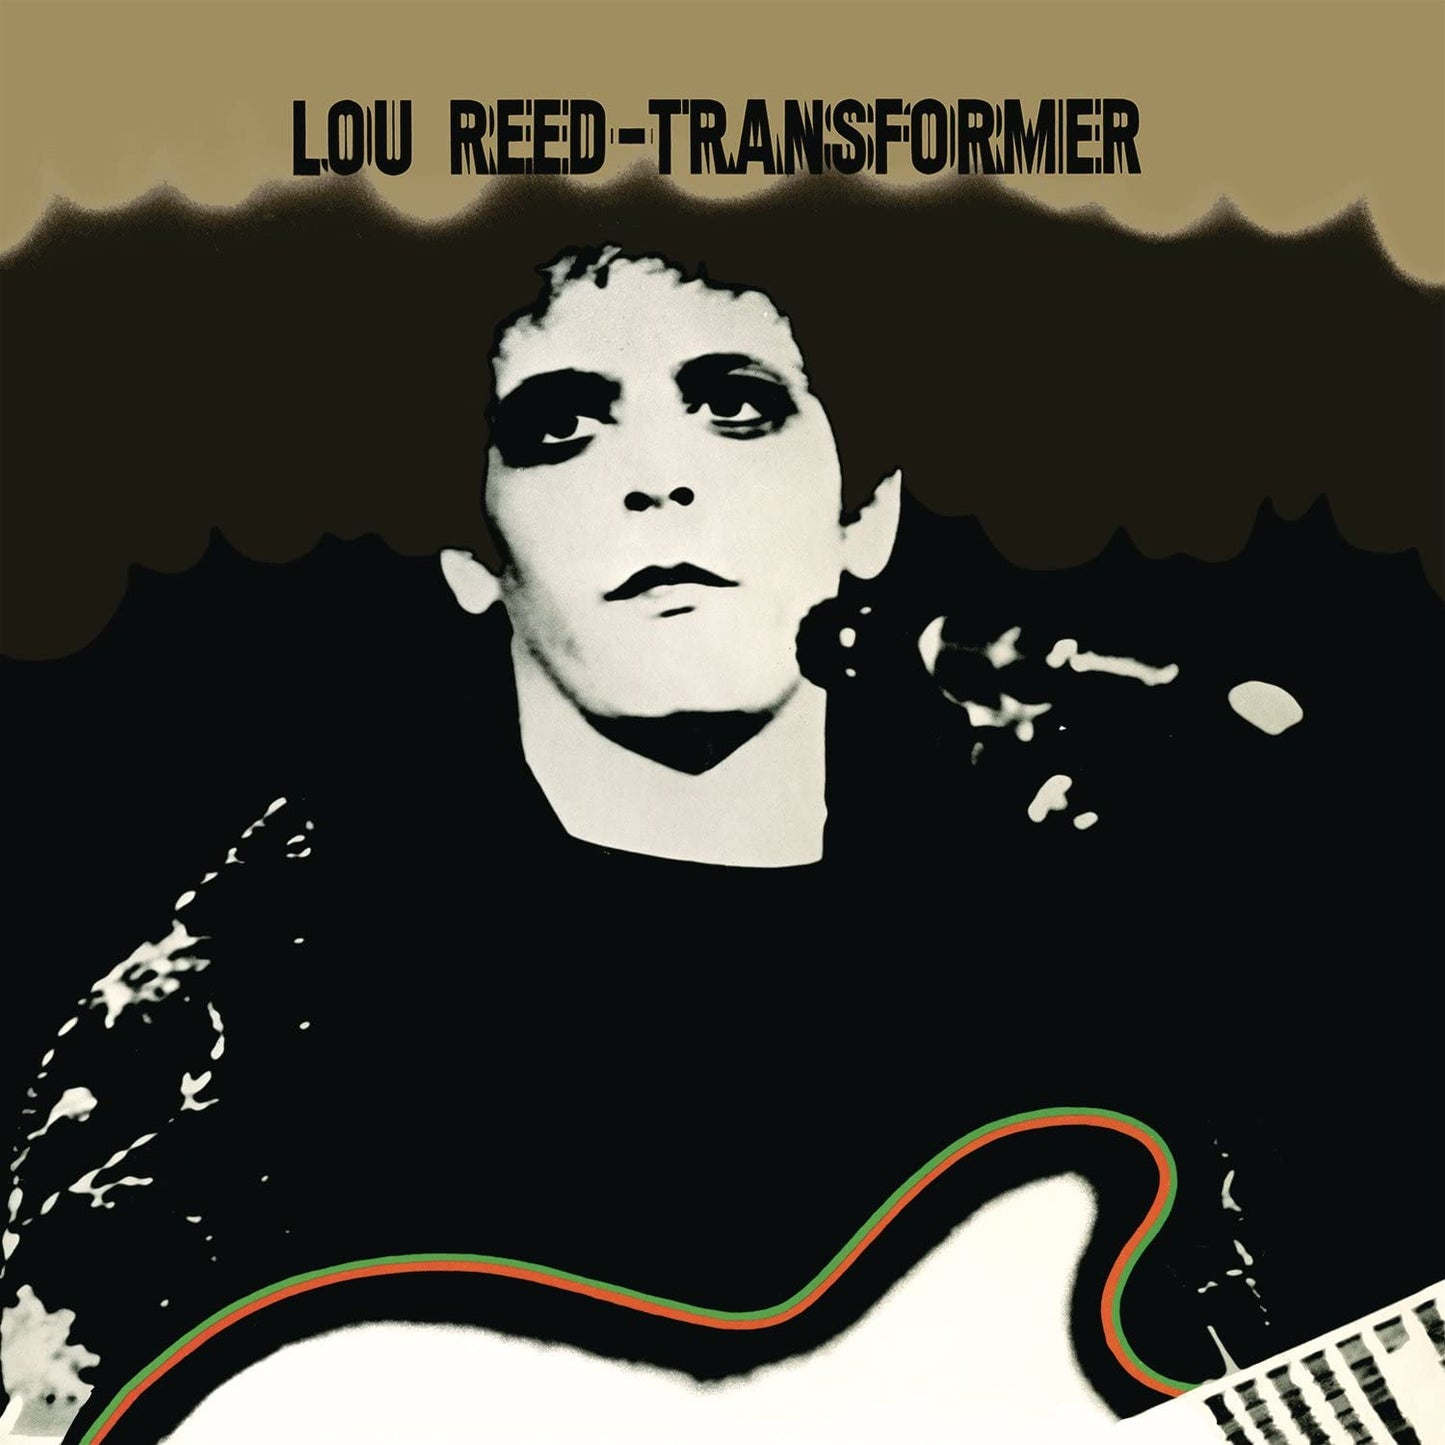 Legendary second solo studio album by American recording artist Lou Reed. Produced by David Bowie and arranged by Mick Ronson, the album was released in November 1972 by RCA Records. Pressed on standard black vinyl.